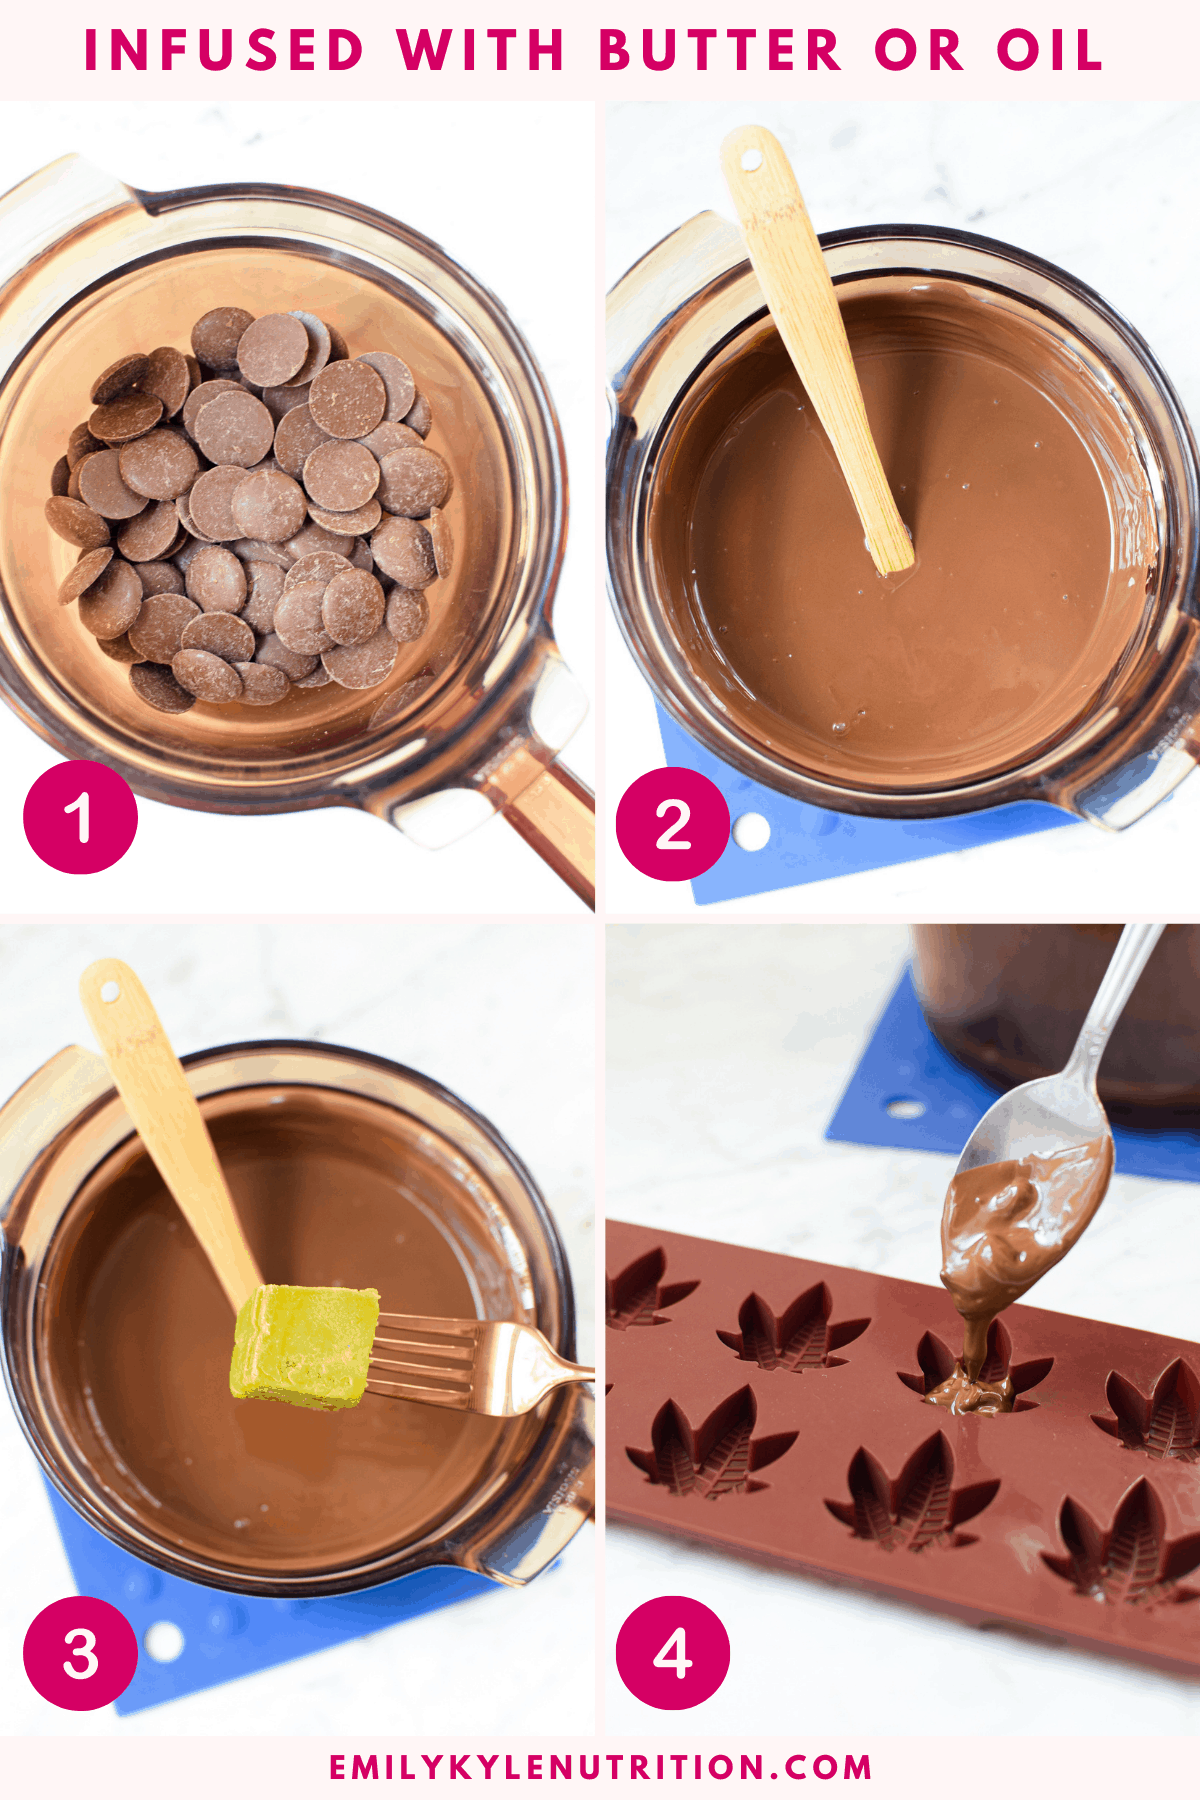 A 4 step collage showing how to infuse cannbutter into chocolate using a double boiler to melt the chocolate, stirring it smooth, and pouring into a mold